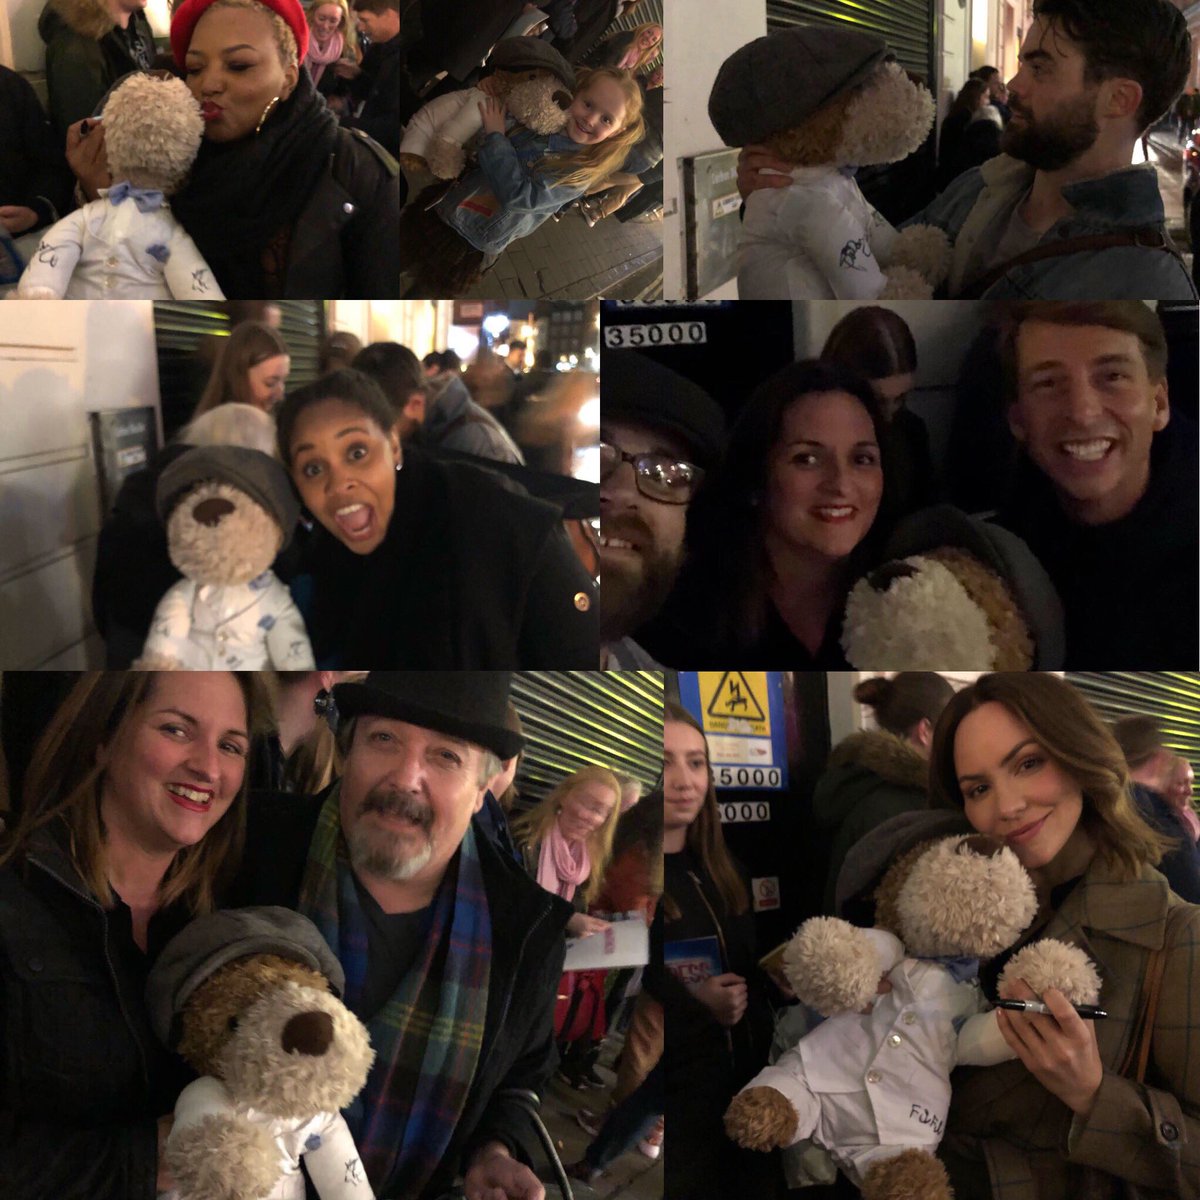 After the show @jnxytheatrepup went to meet the stars of the show, who were all lovely and signed his suit. #JnxyTheTheatrePup was very excited to meet so many people!
#ManIntheHat #waitressmusical #musicaltheatre #musiciansofinstagram #musicianofinstagram #fun